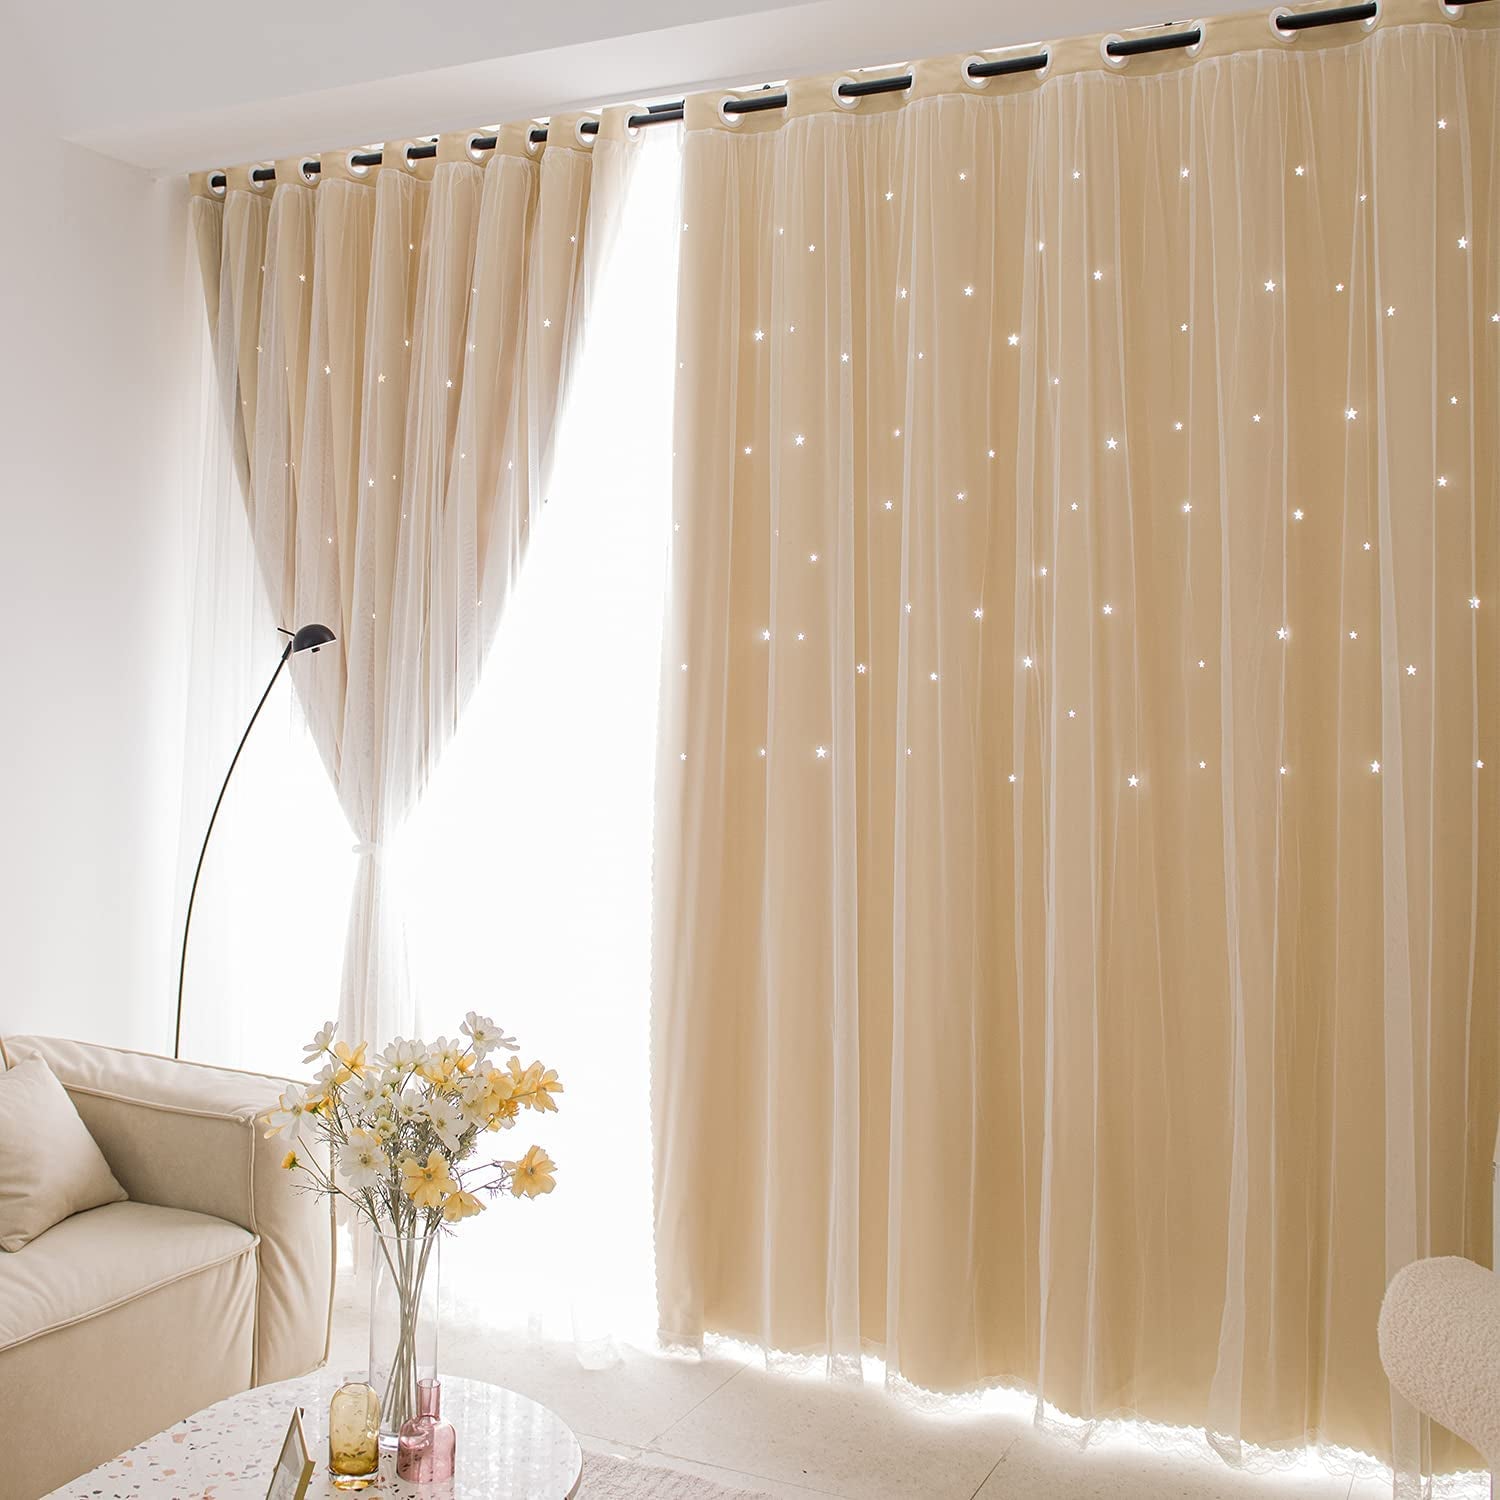 UNISTAR 2 Panels Stars Blackout Curtains for Bedroom Girls Kids Baby Window Decoration Double Layer Star Cut Out Aesthetic Living Room Decor Wall Home Curtain,W52 X L63 Inches,Pink  UNISTAR 2Panels 丨Double-Layer,Beige 63.00" X 52.00" 